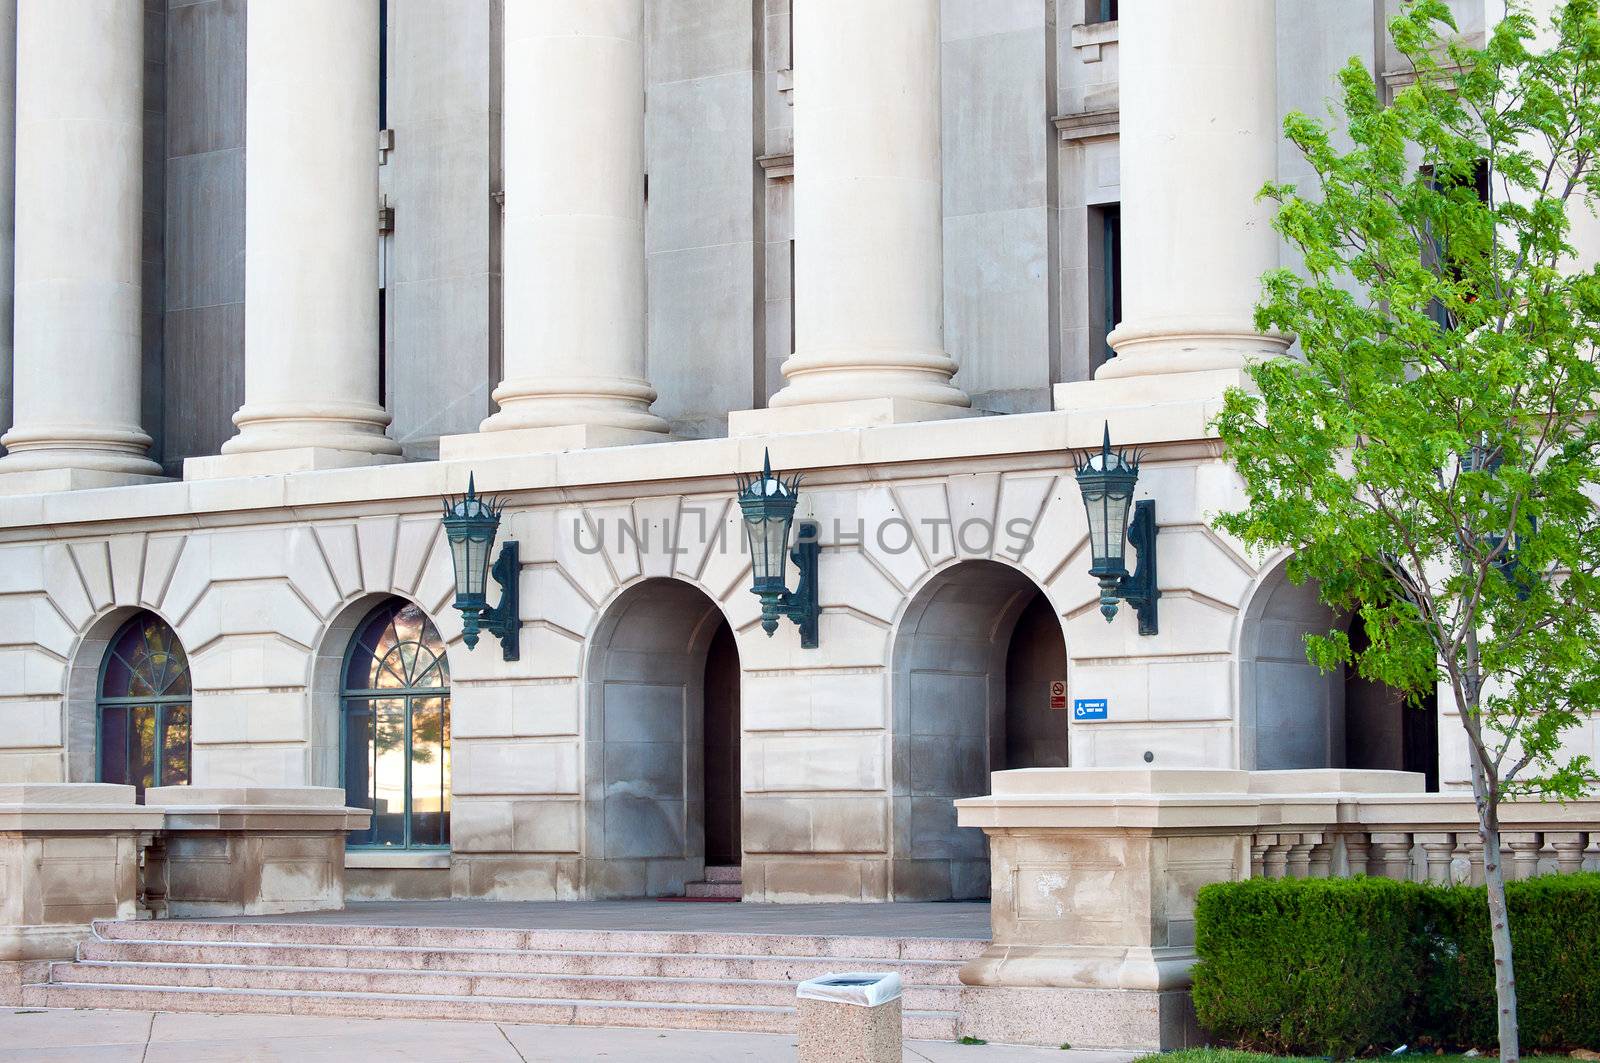 Columns and entrance to the weld county court house in Greeley, Colorado USA.